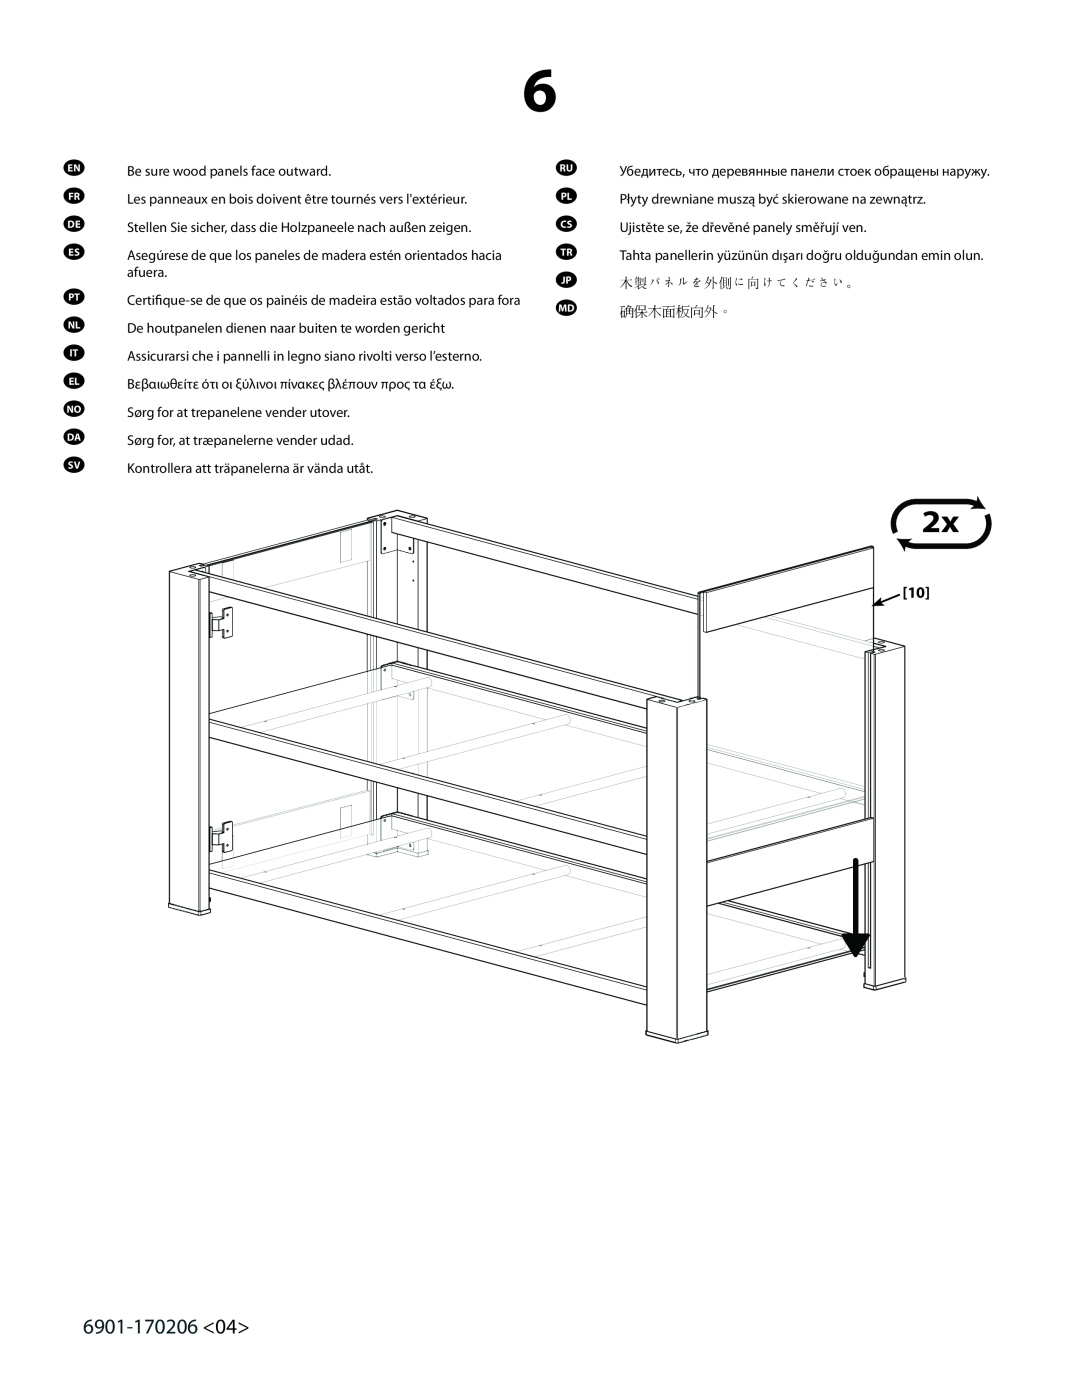 Sanus Systems DFV49 important safety instructions 6901-170206, Be sure wood panels face outward 